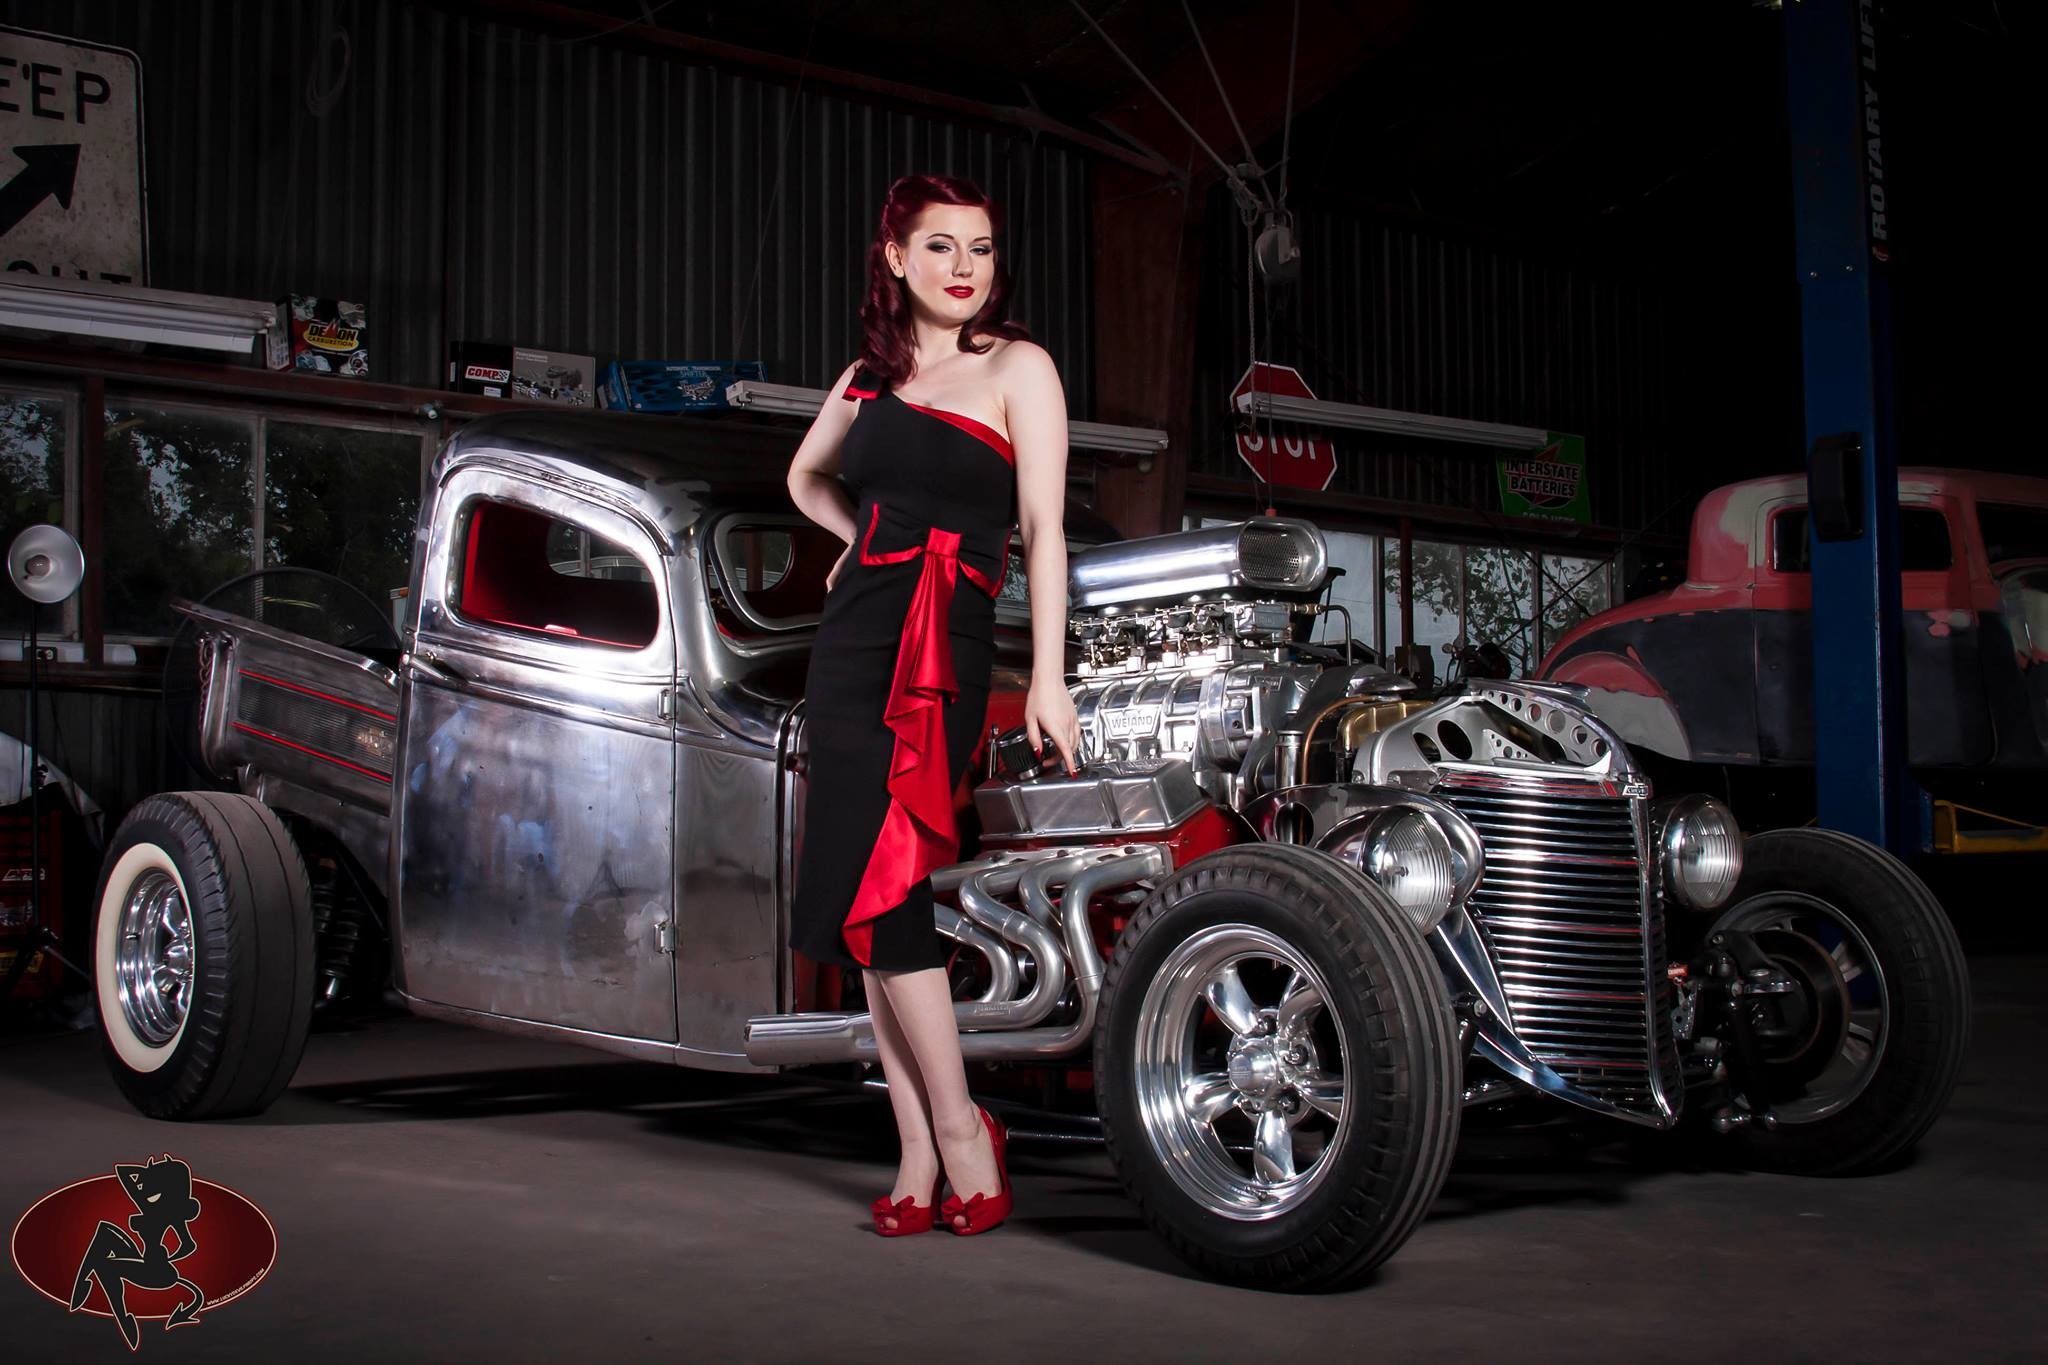 People 2048x1365 women car redhead open-toed shoes Lucky Devil women with cars old car Hot Rod smiling dress model vehicle heels red heels